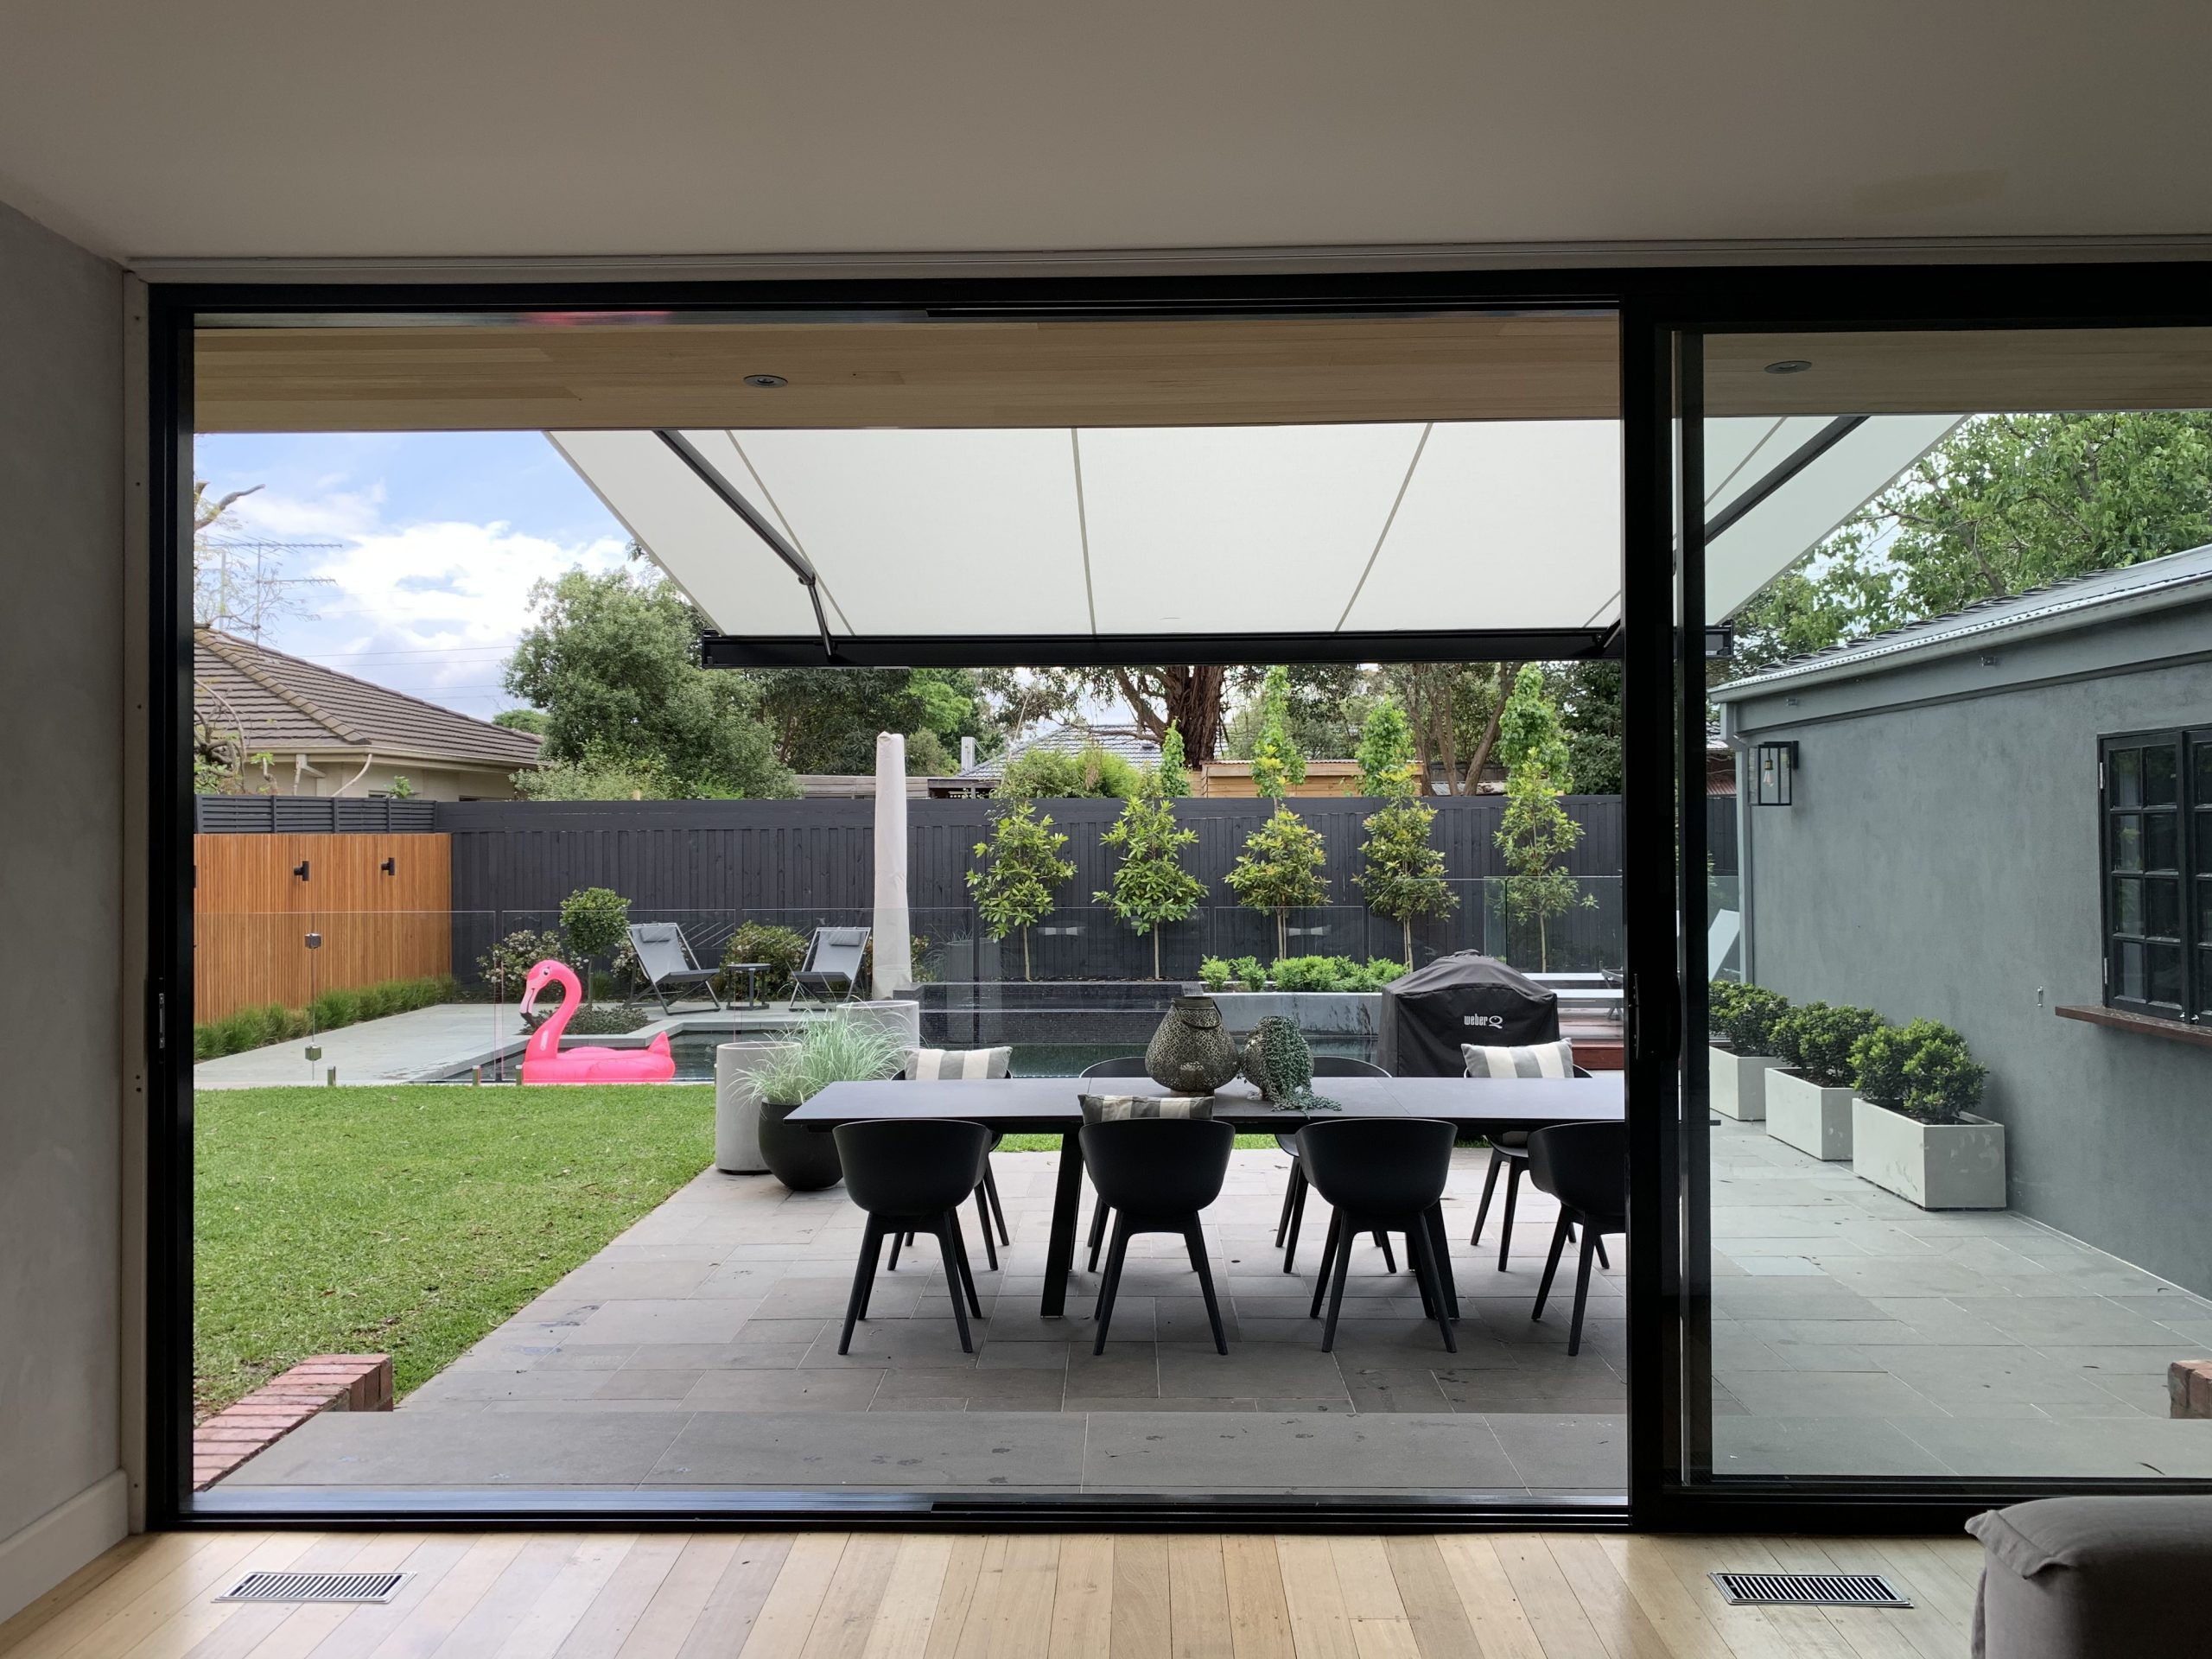 markilux folding arm awning over outdoor entertainment space